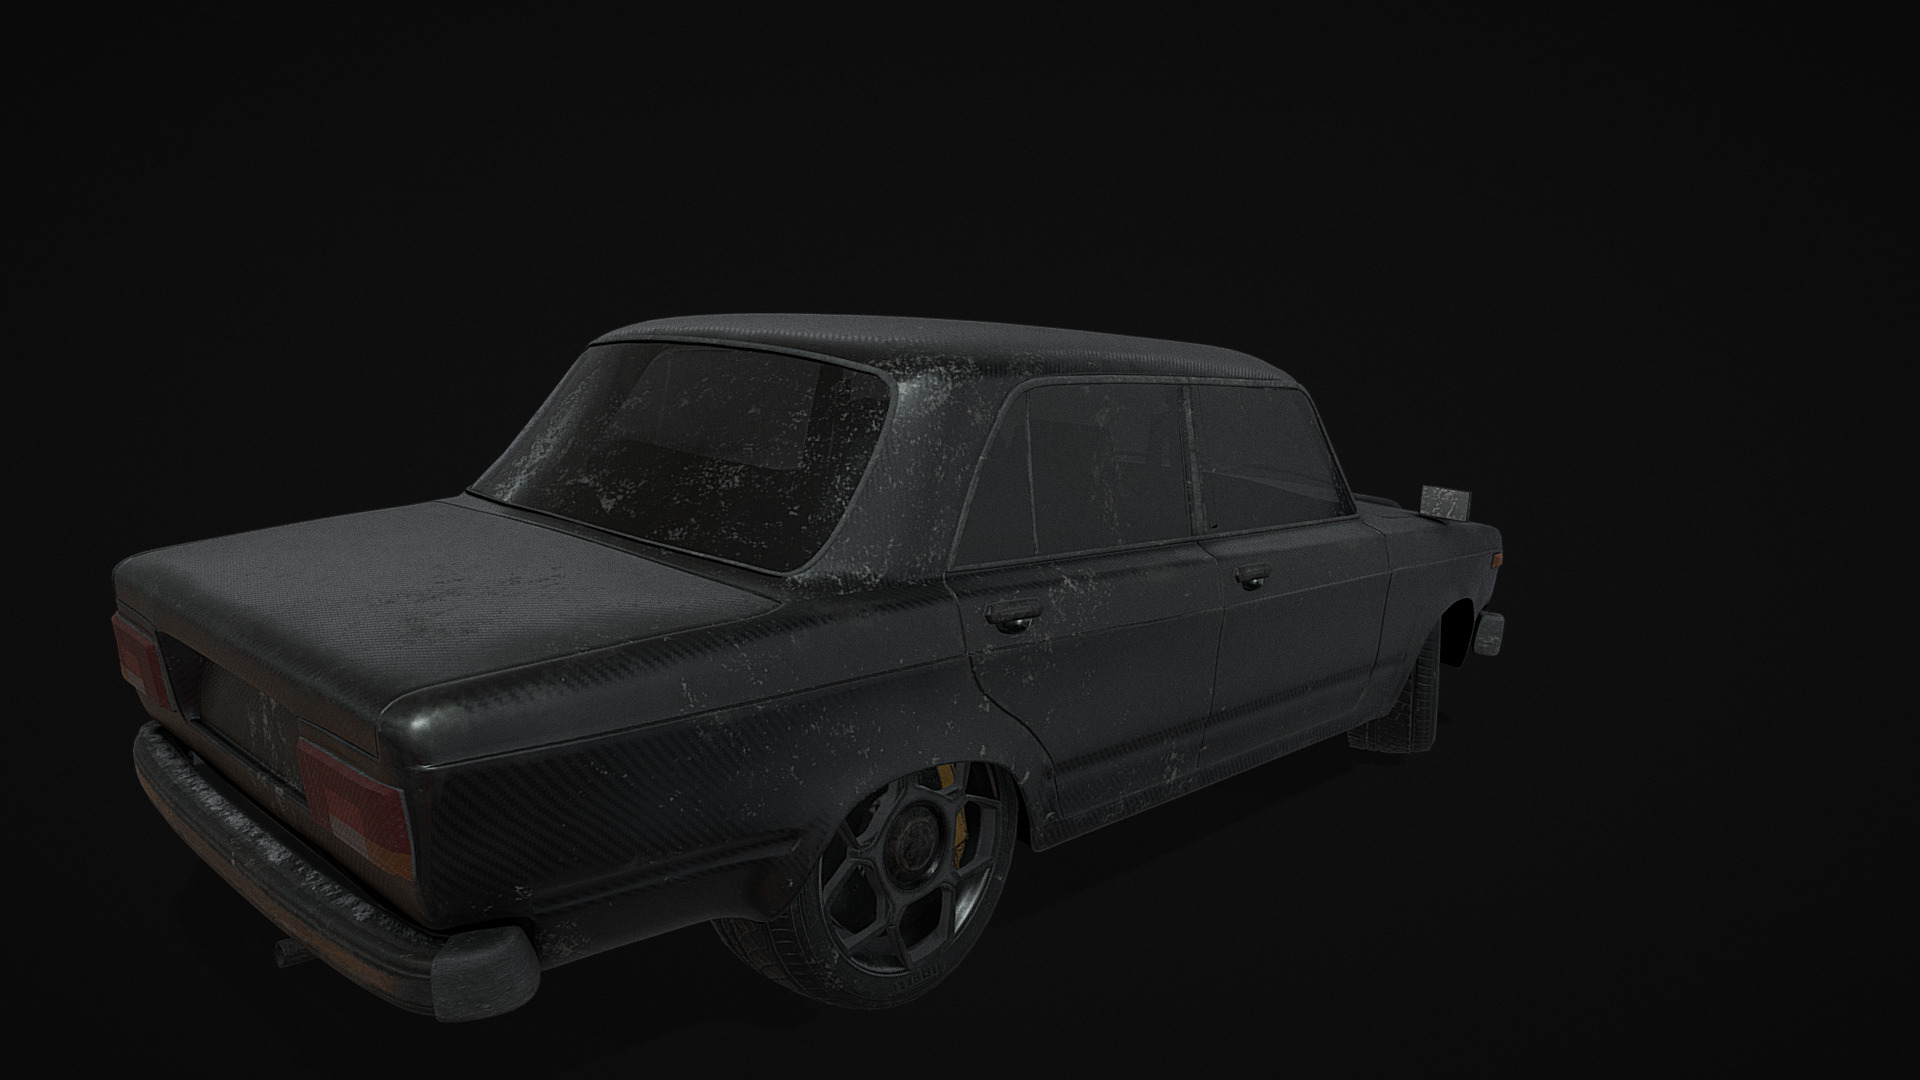 3D model ladna - This is a 3D model of the ladna. The 3D model is about a black car with a white background.